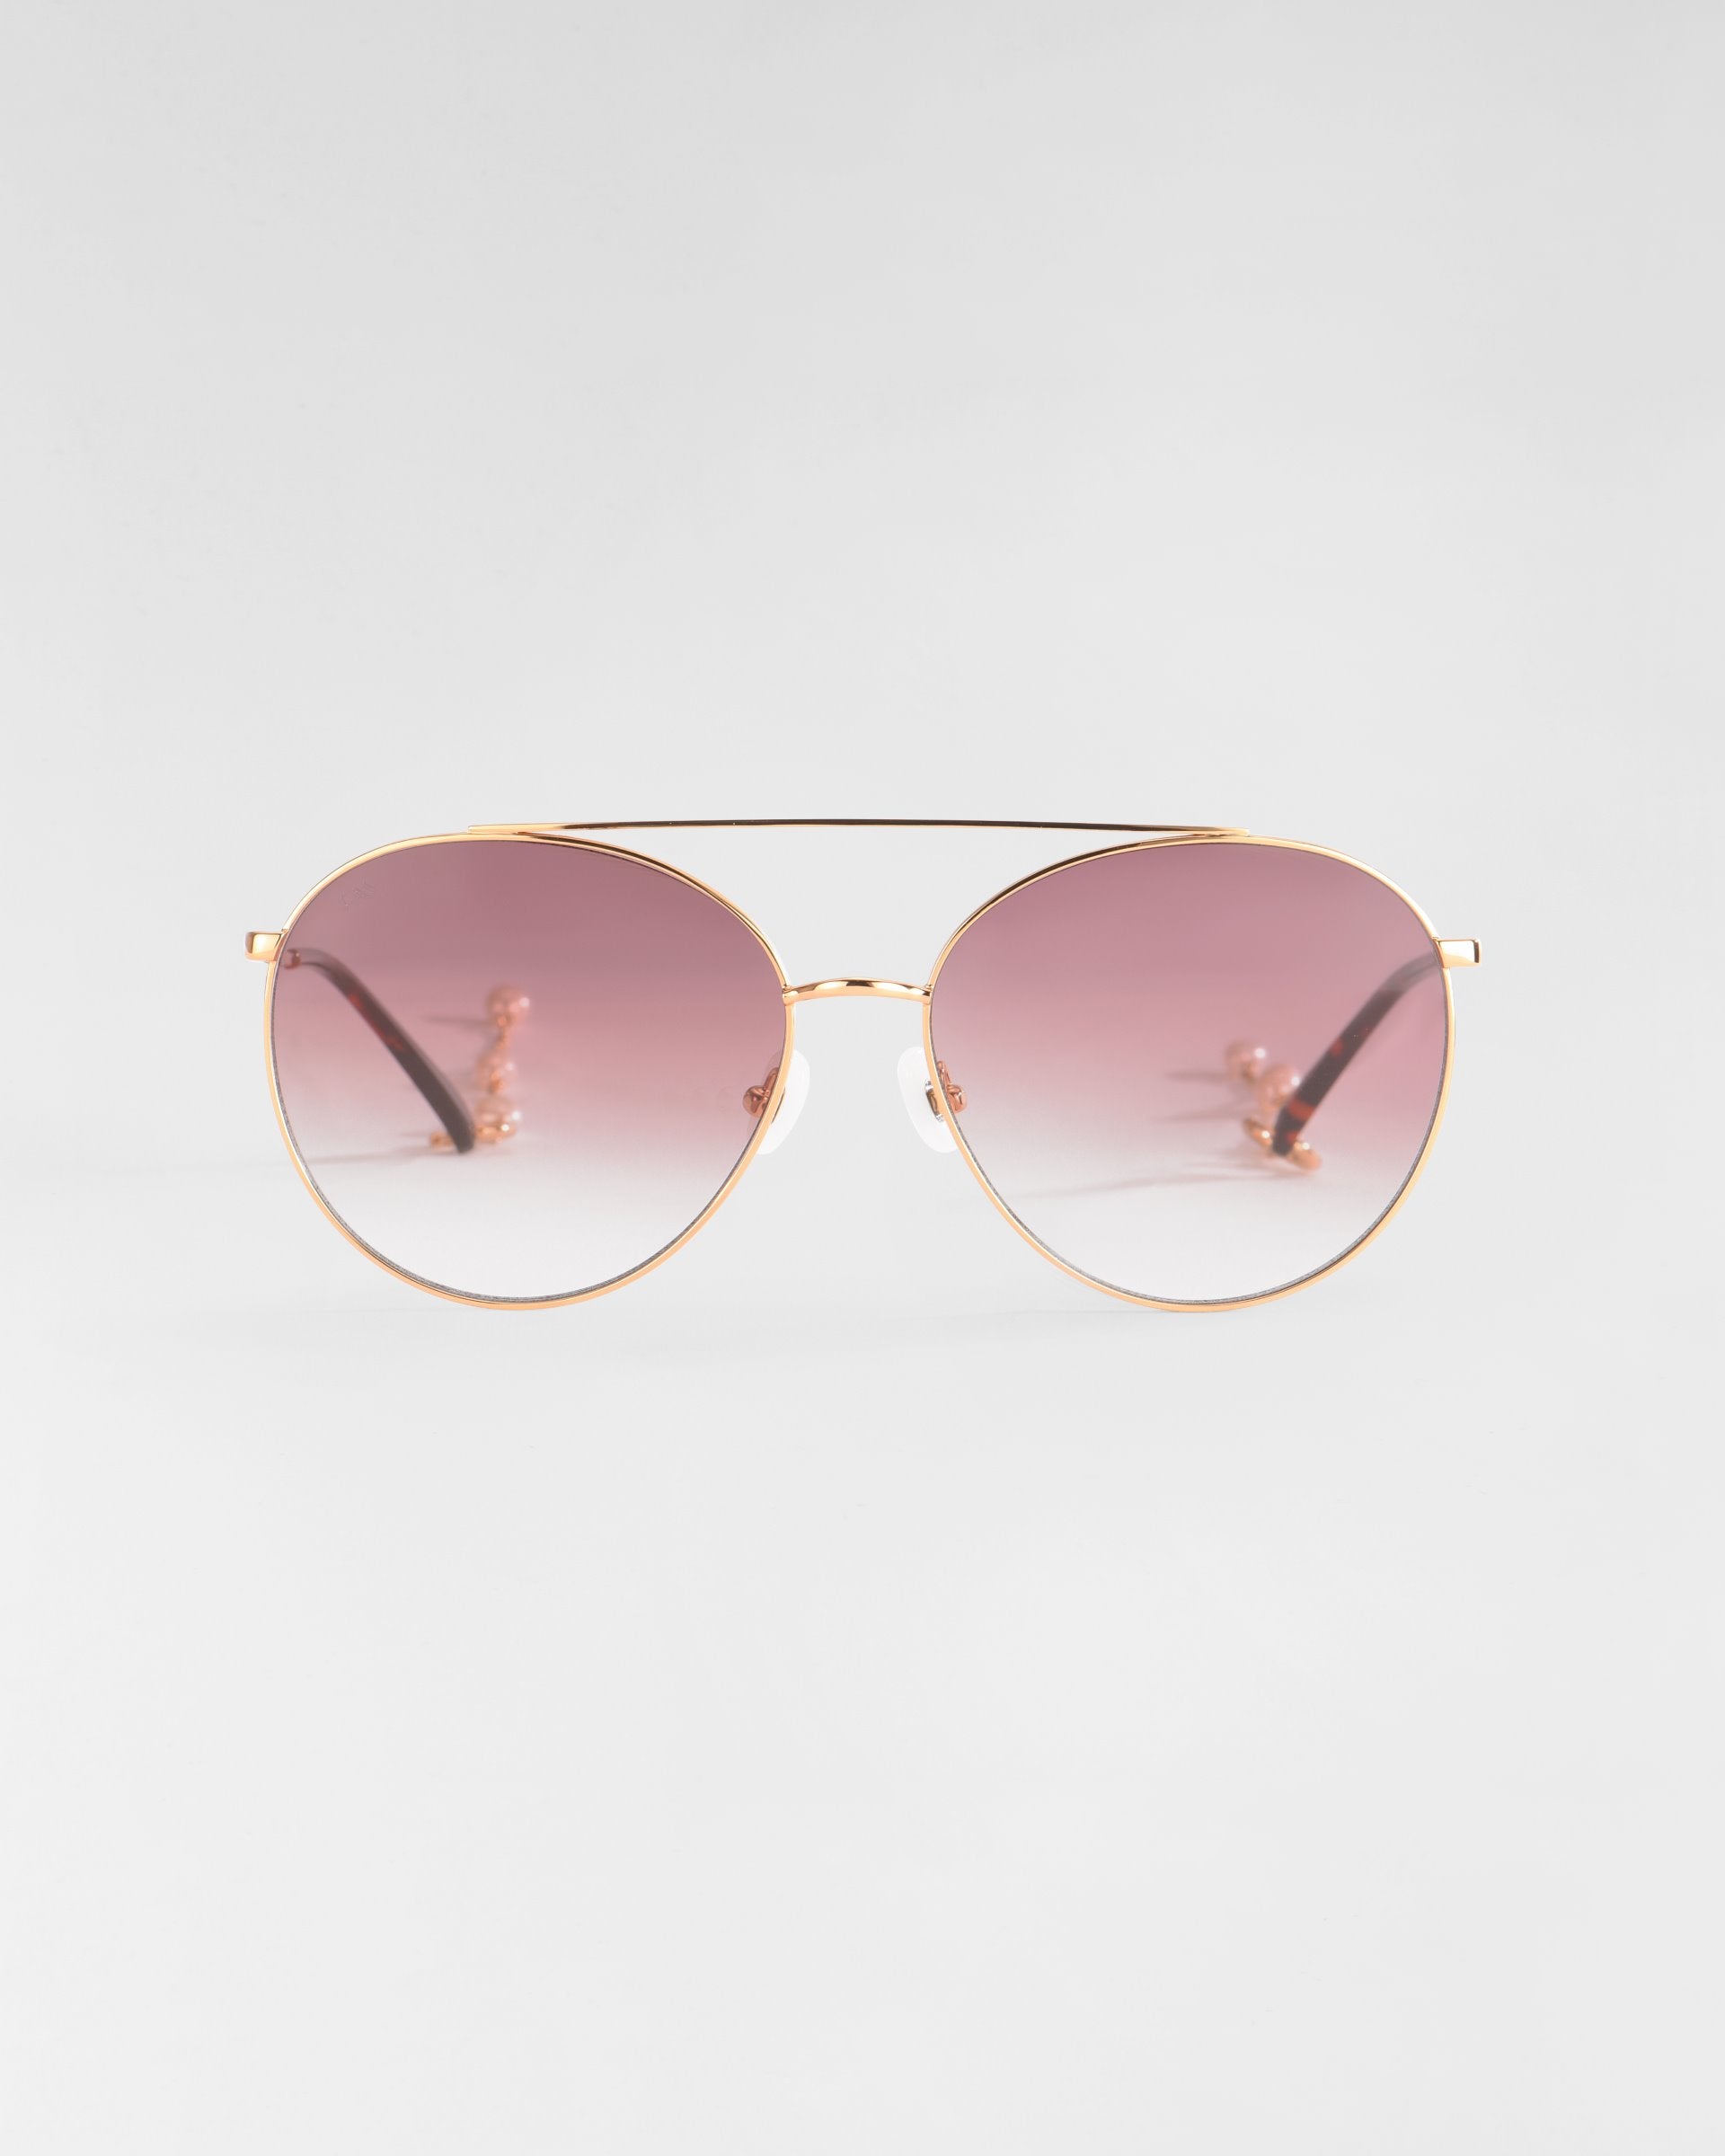 A pair of stylish aviator sunglasses named Yoyo by For Art's Sake® with 18k gold-plated metal frames and gradient pink-tinted lenses is centered against a plain, light gray background. The Yoyo sunglasses feature thin arms and adjustable nose pads for comfort.